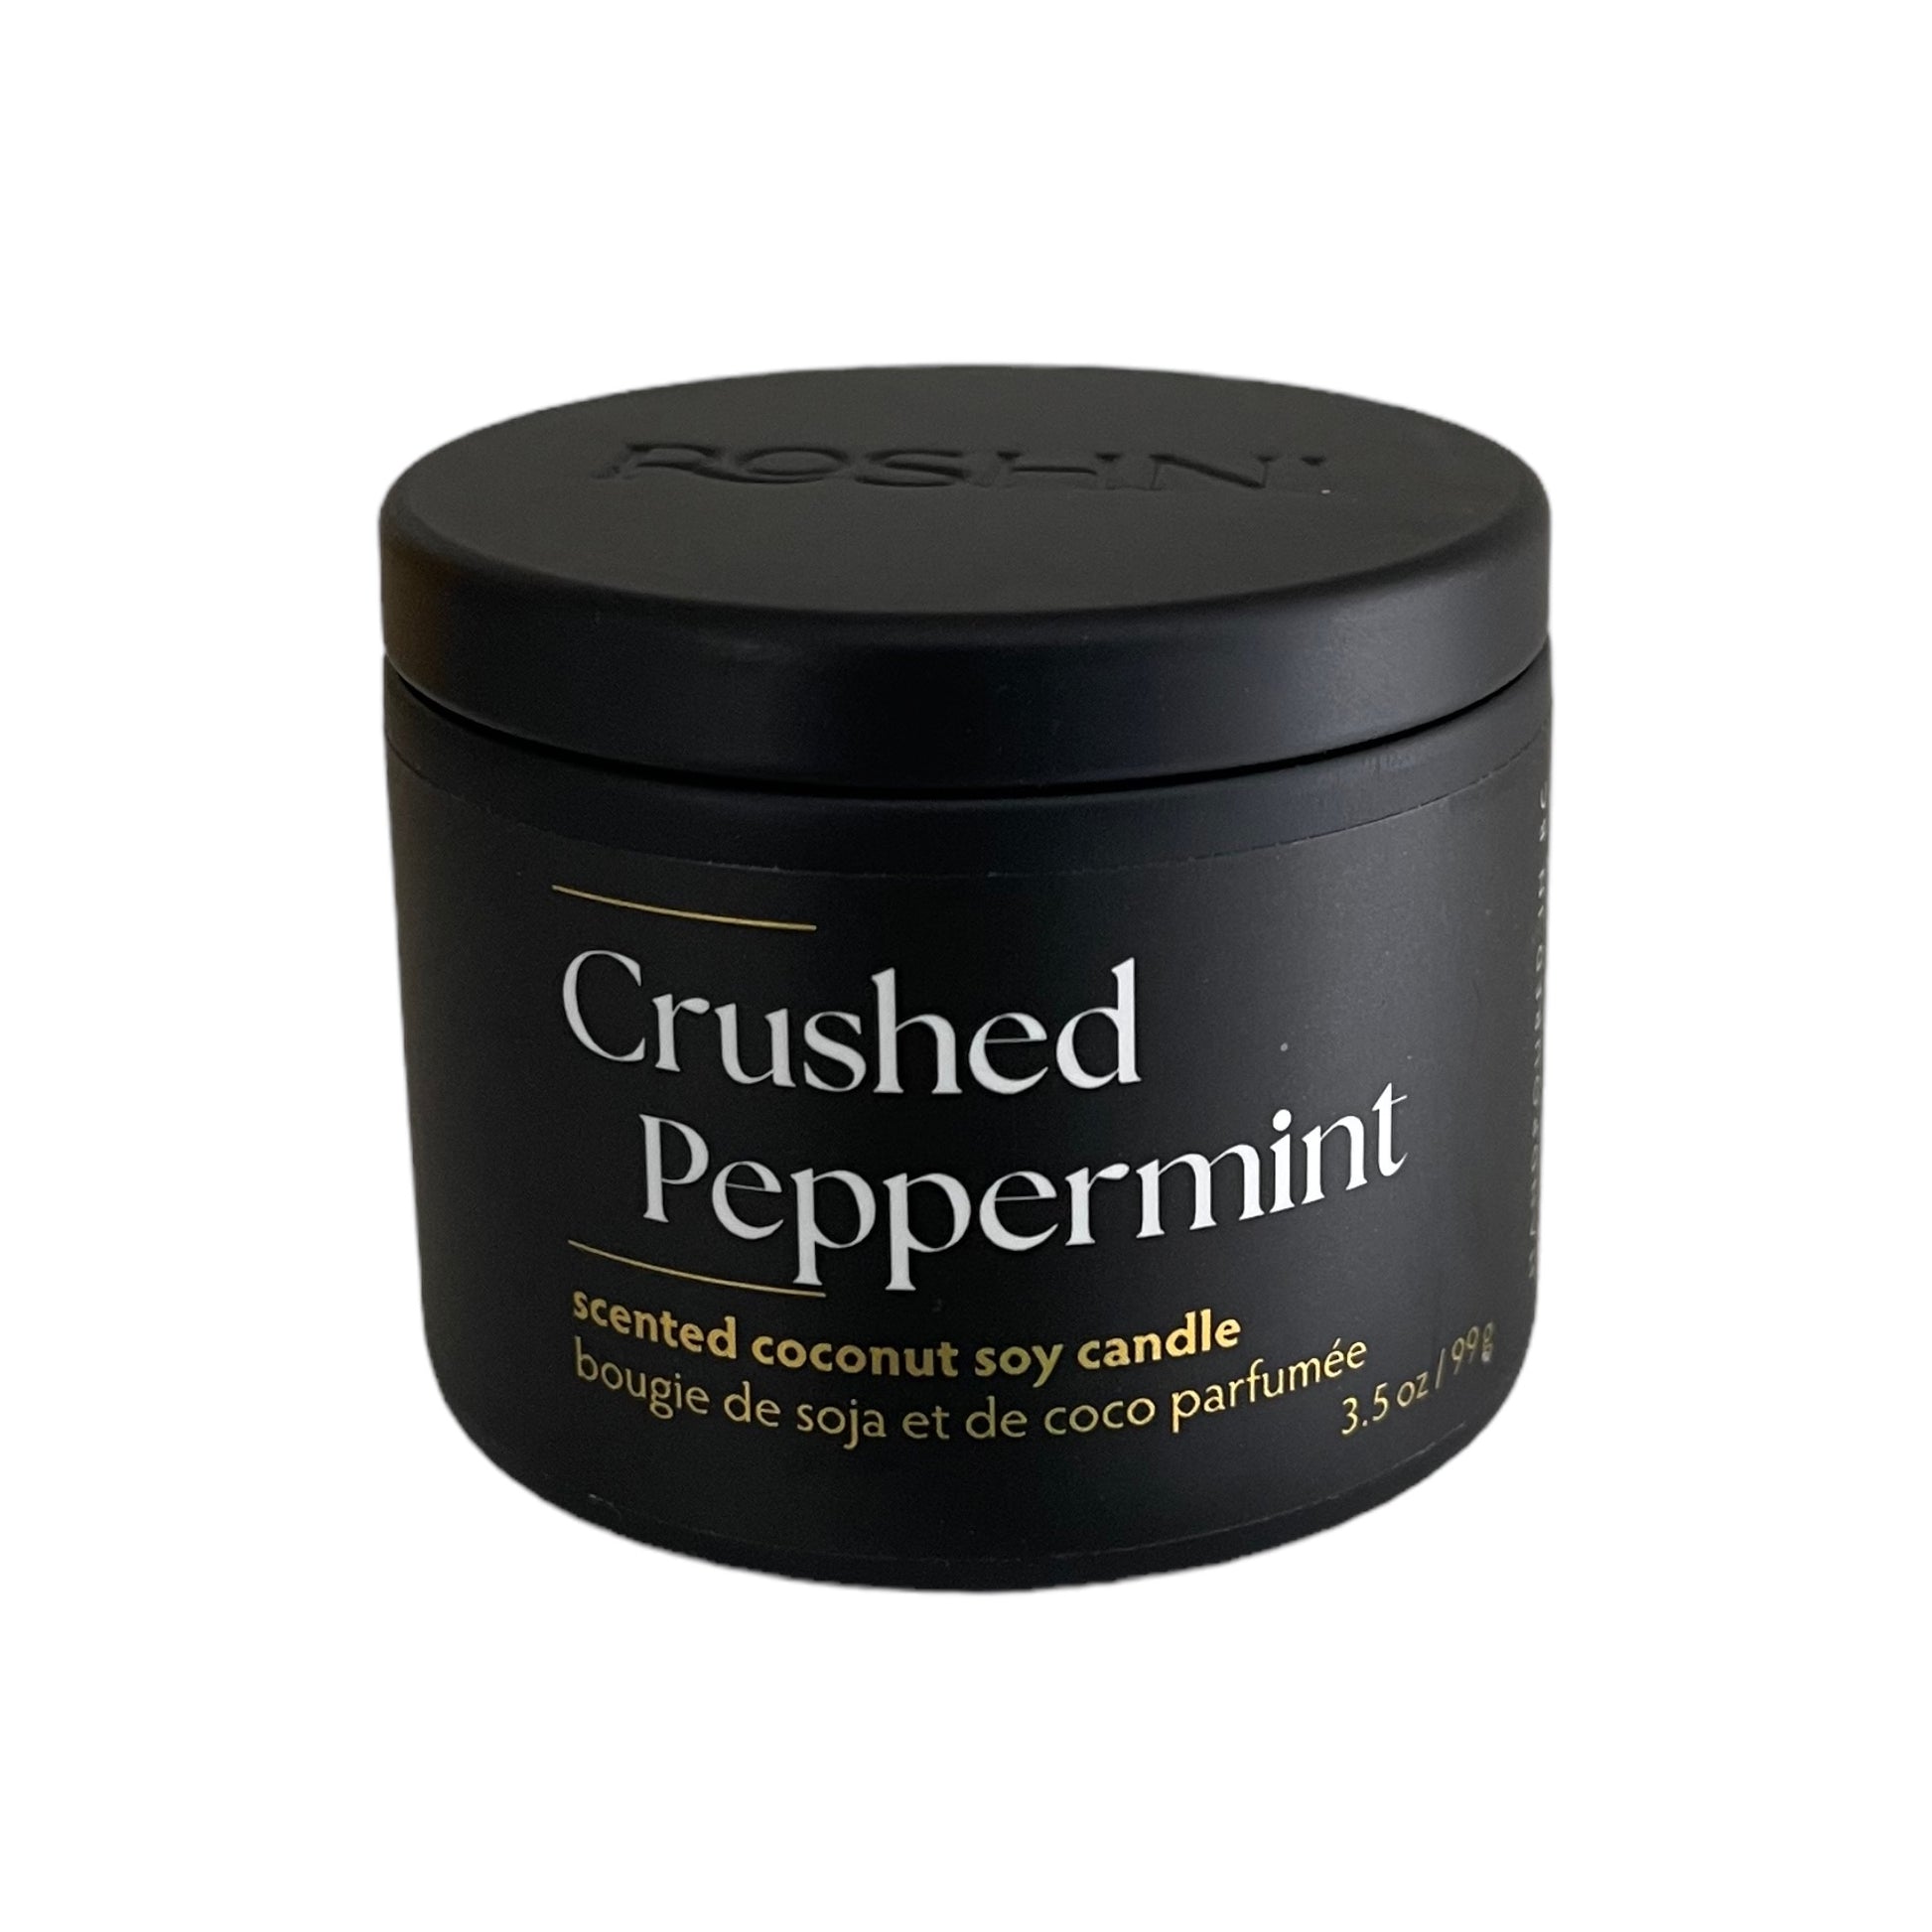 Crushed Peppermint Candle